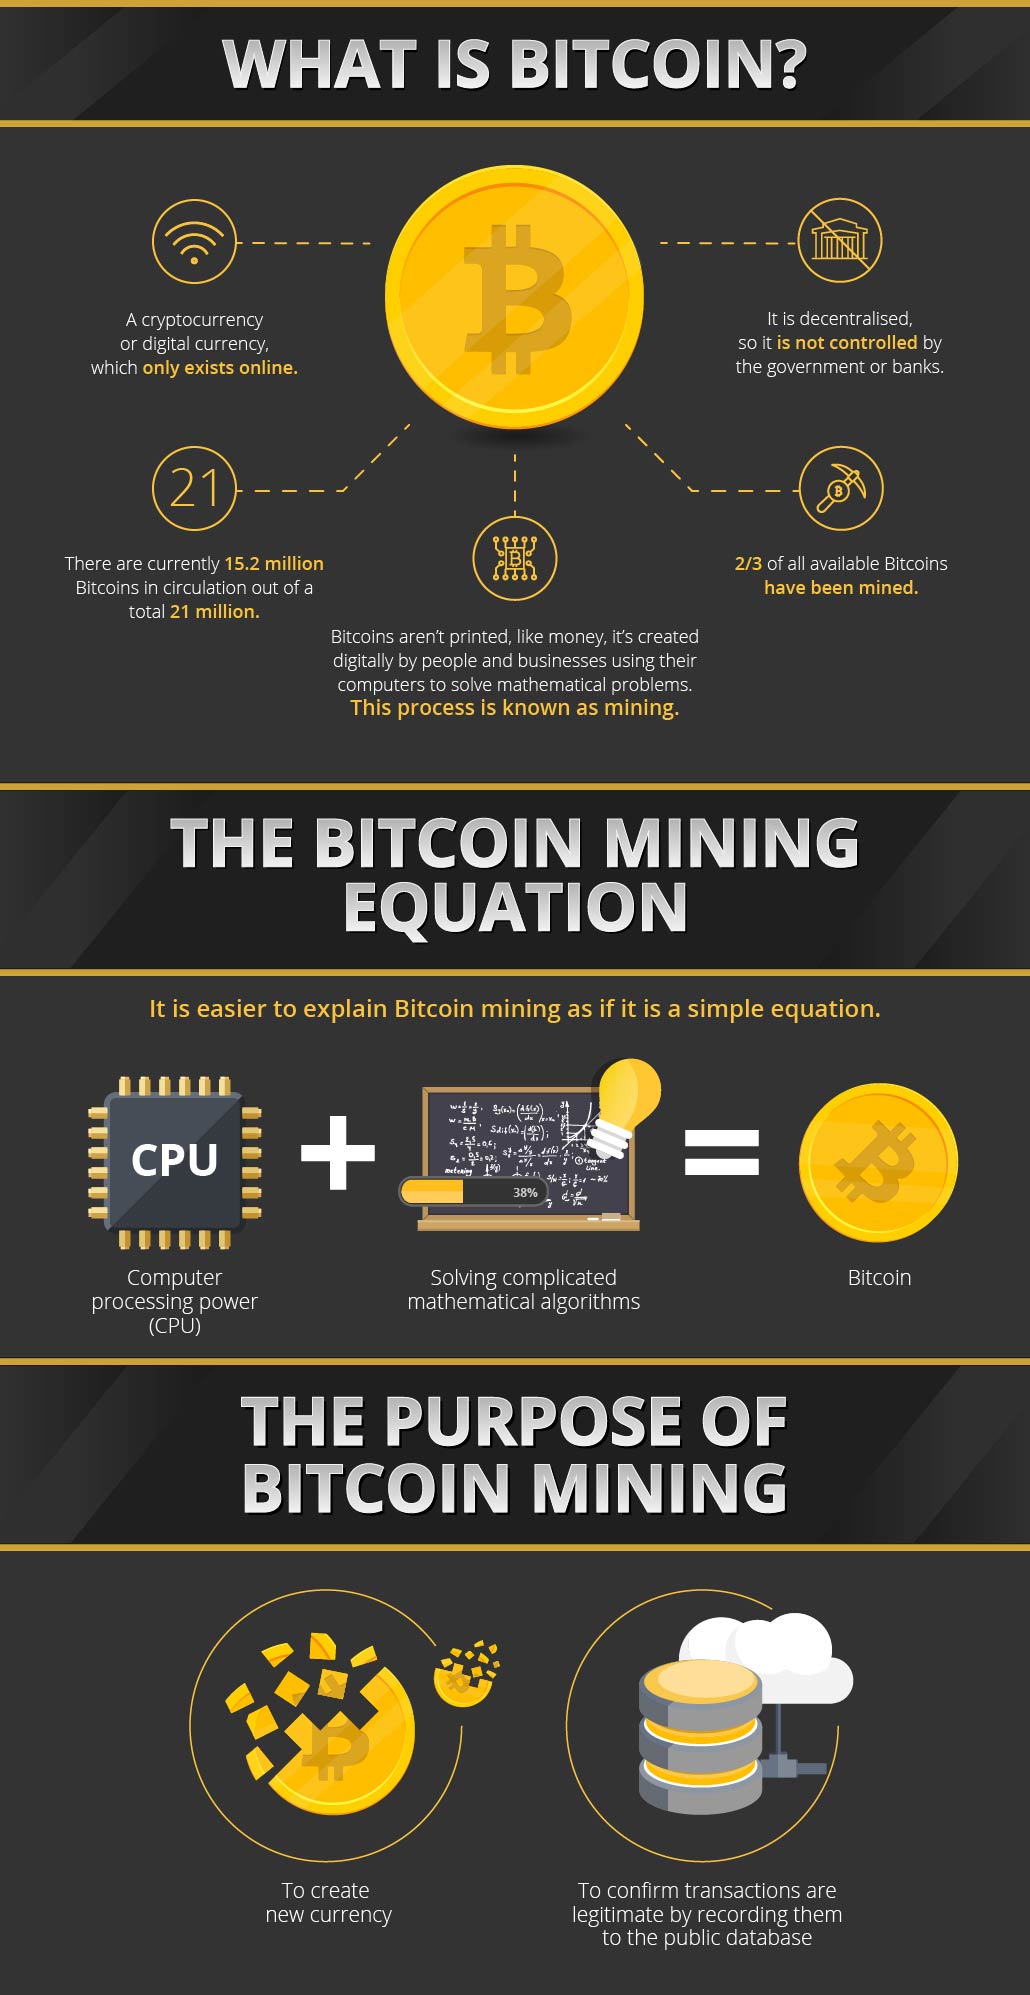 what is needed to mine bitcoins